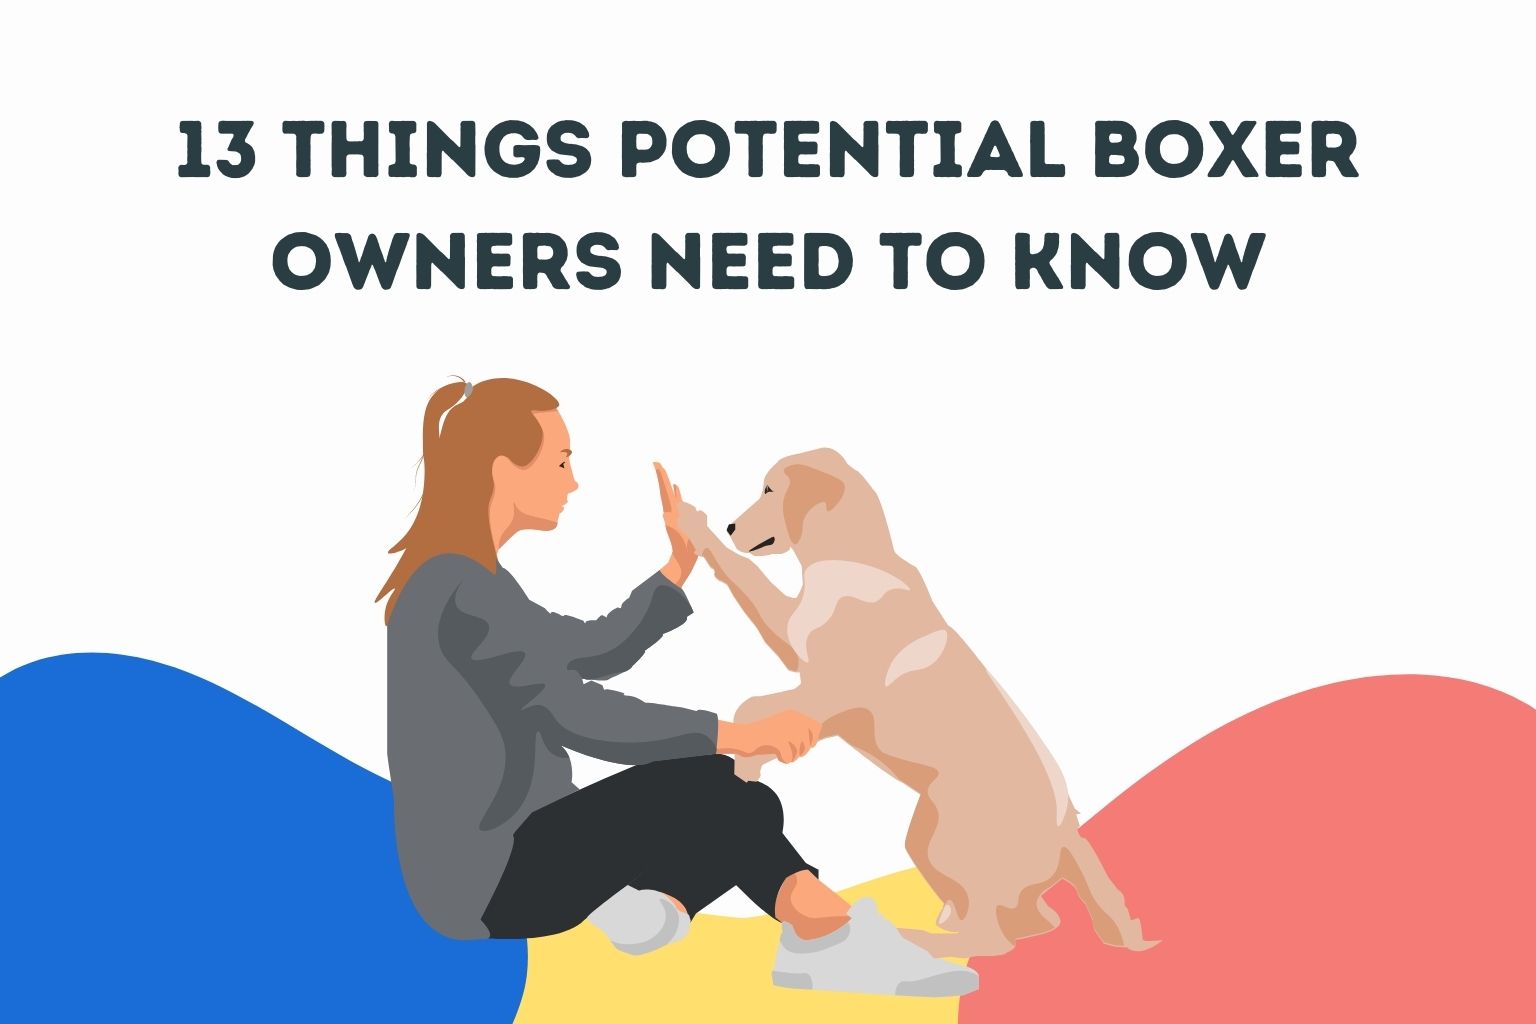 13 Things Potential Boxer Owners Need to Know